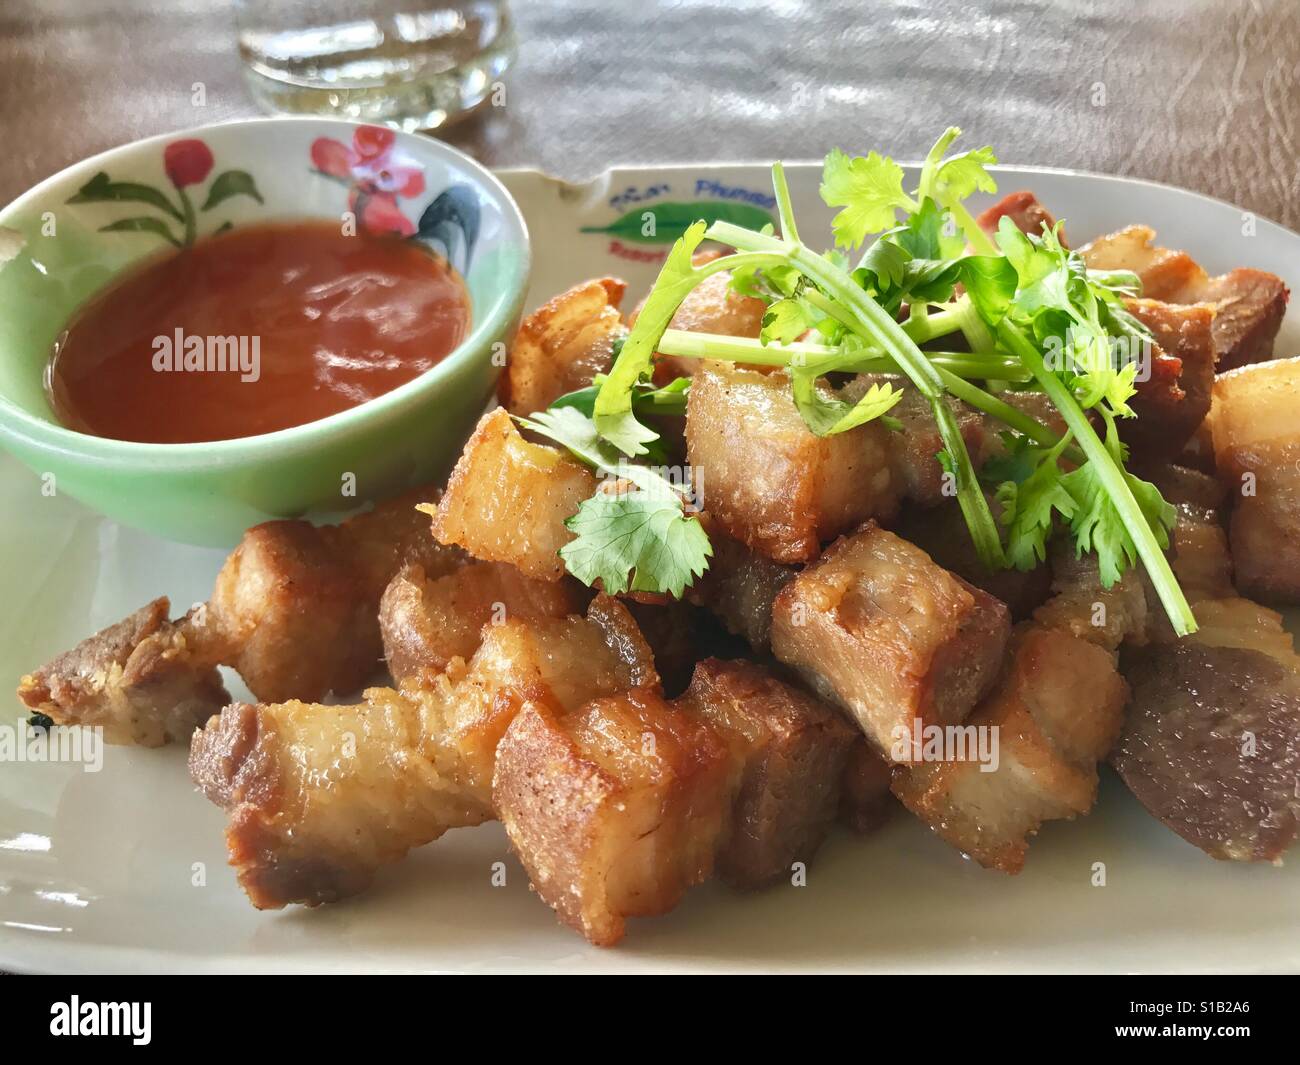 Deep fried streaky pork with ketchup Stock Photo